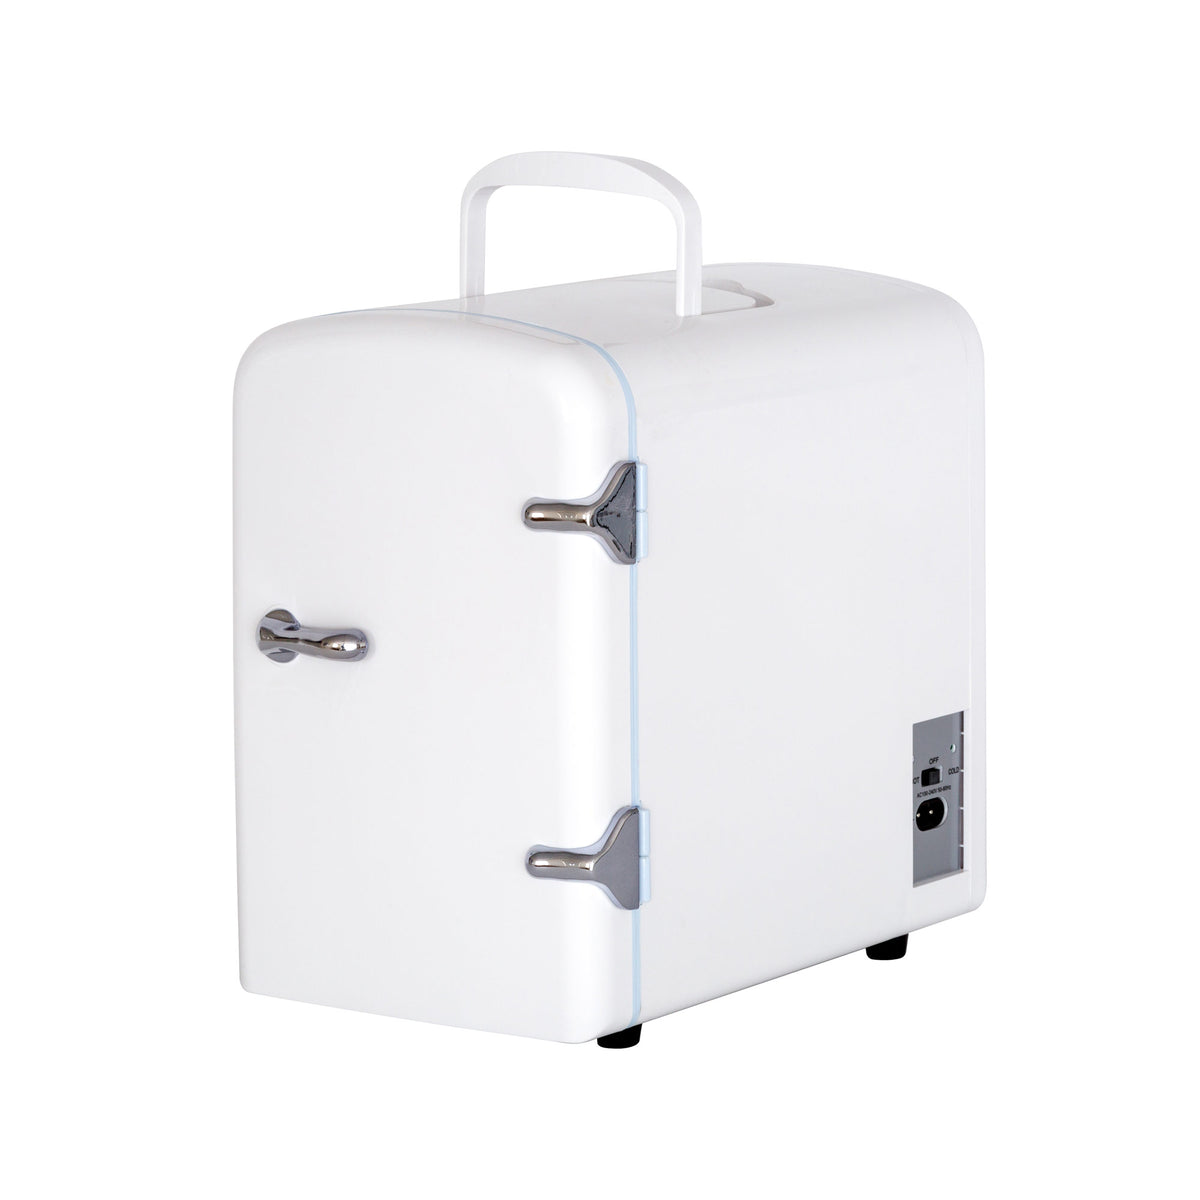 Angle view of the BF550 Cosmetics, Beauty & Skincare Fridge in white colour with a carry handle on top.